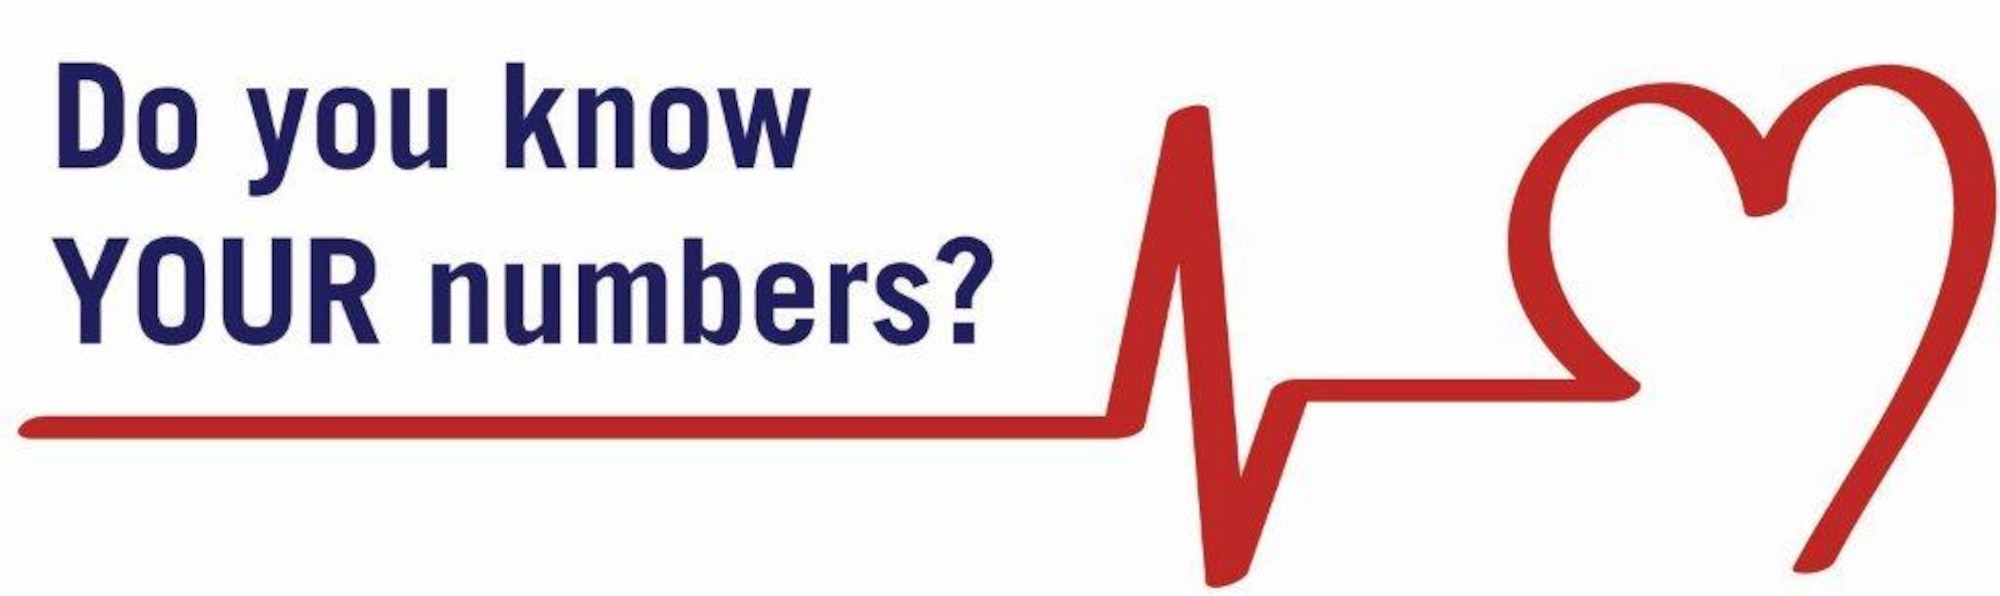 AFMC will promote the "Do You Know Your Numbers" wellness campaign in December and January.